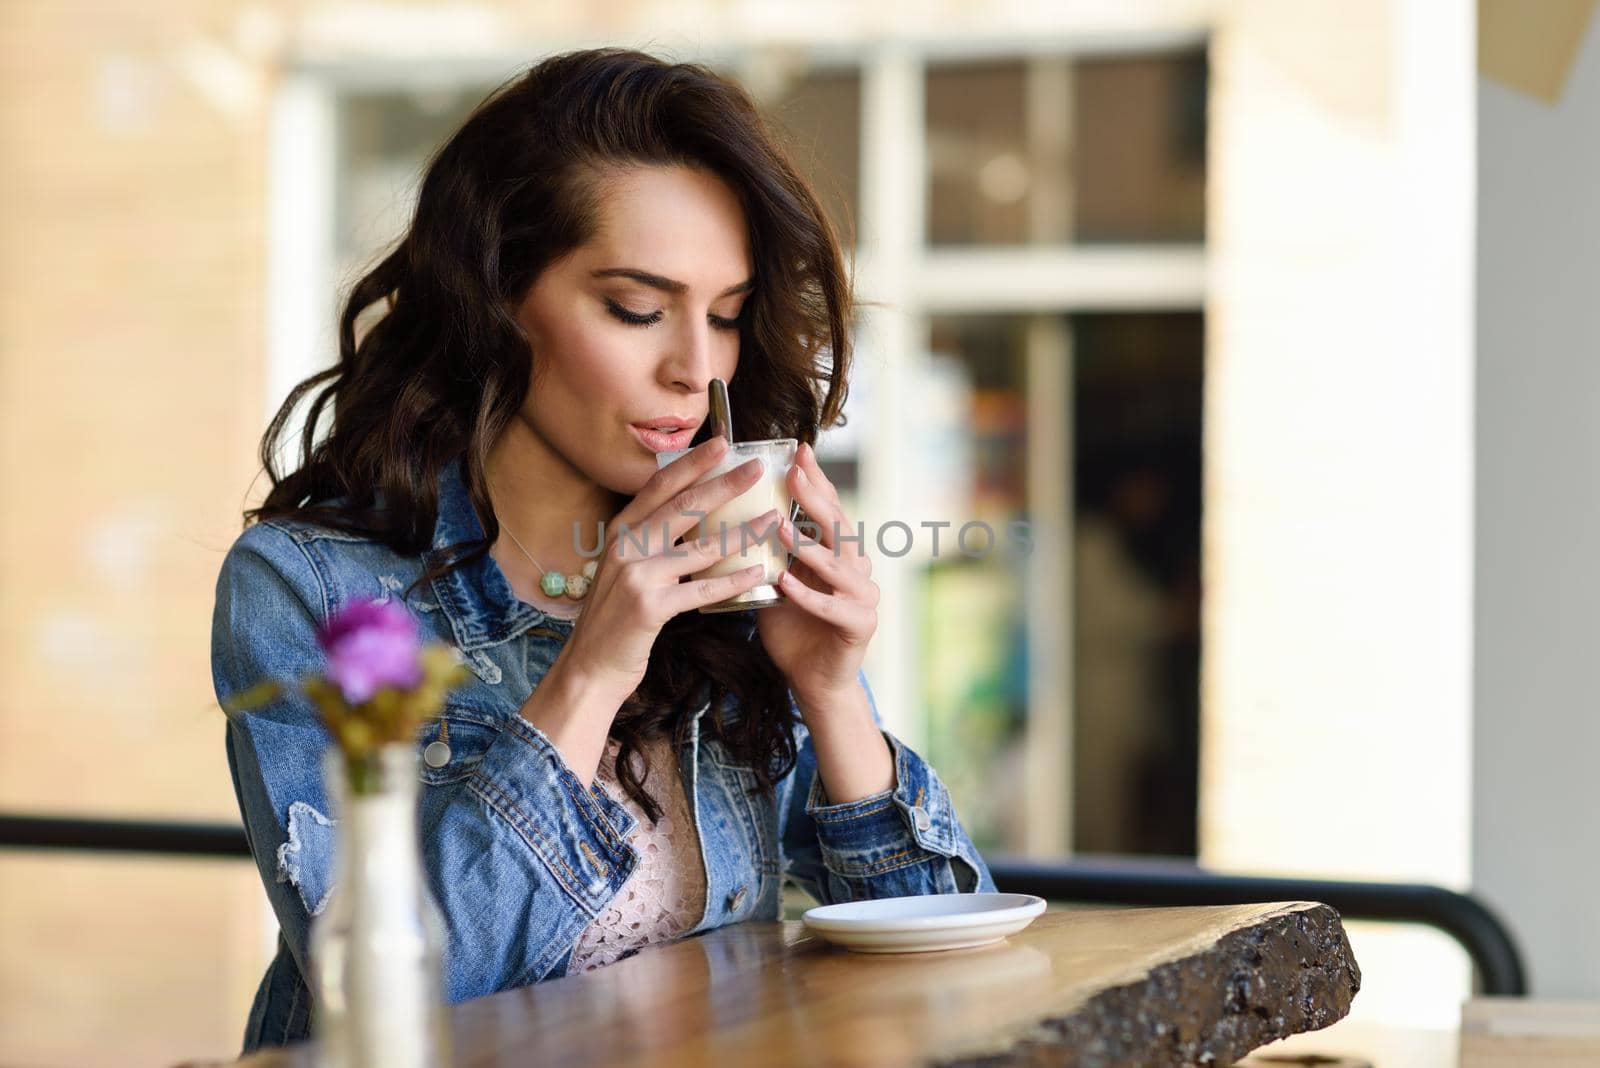 Young woman sitting indoor drinking coffee. Cool young modern caucasian female in her 20s. Cafe city lifestyle.